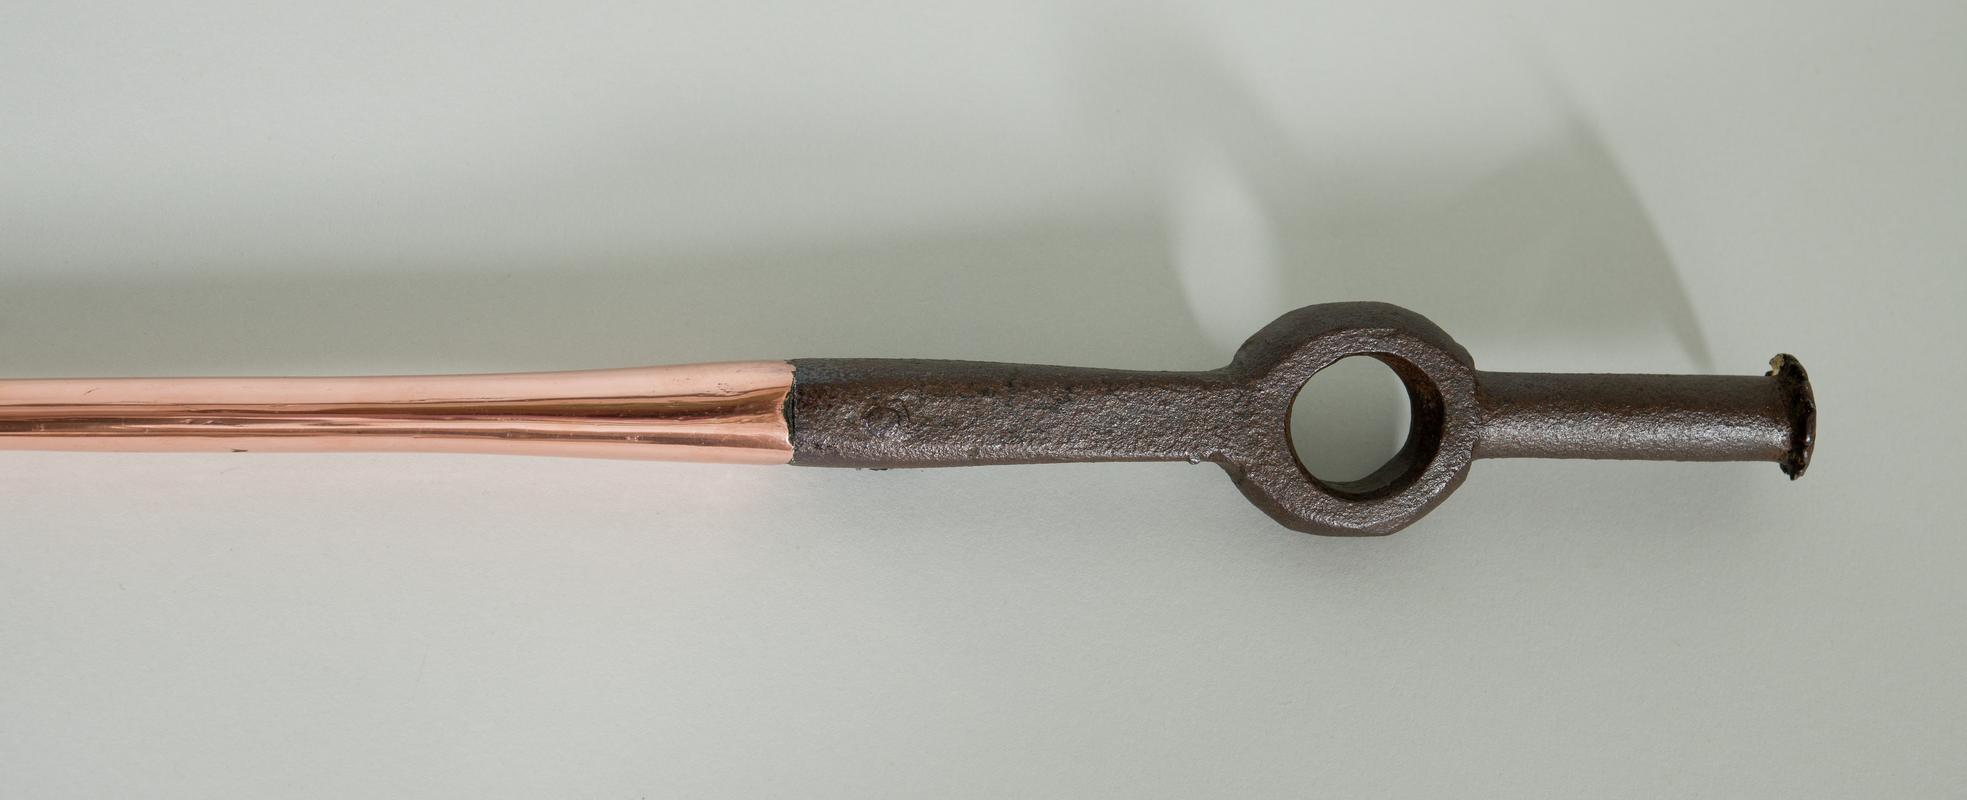 Copper pricker with metal handle.